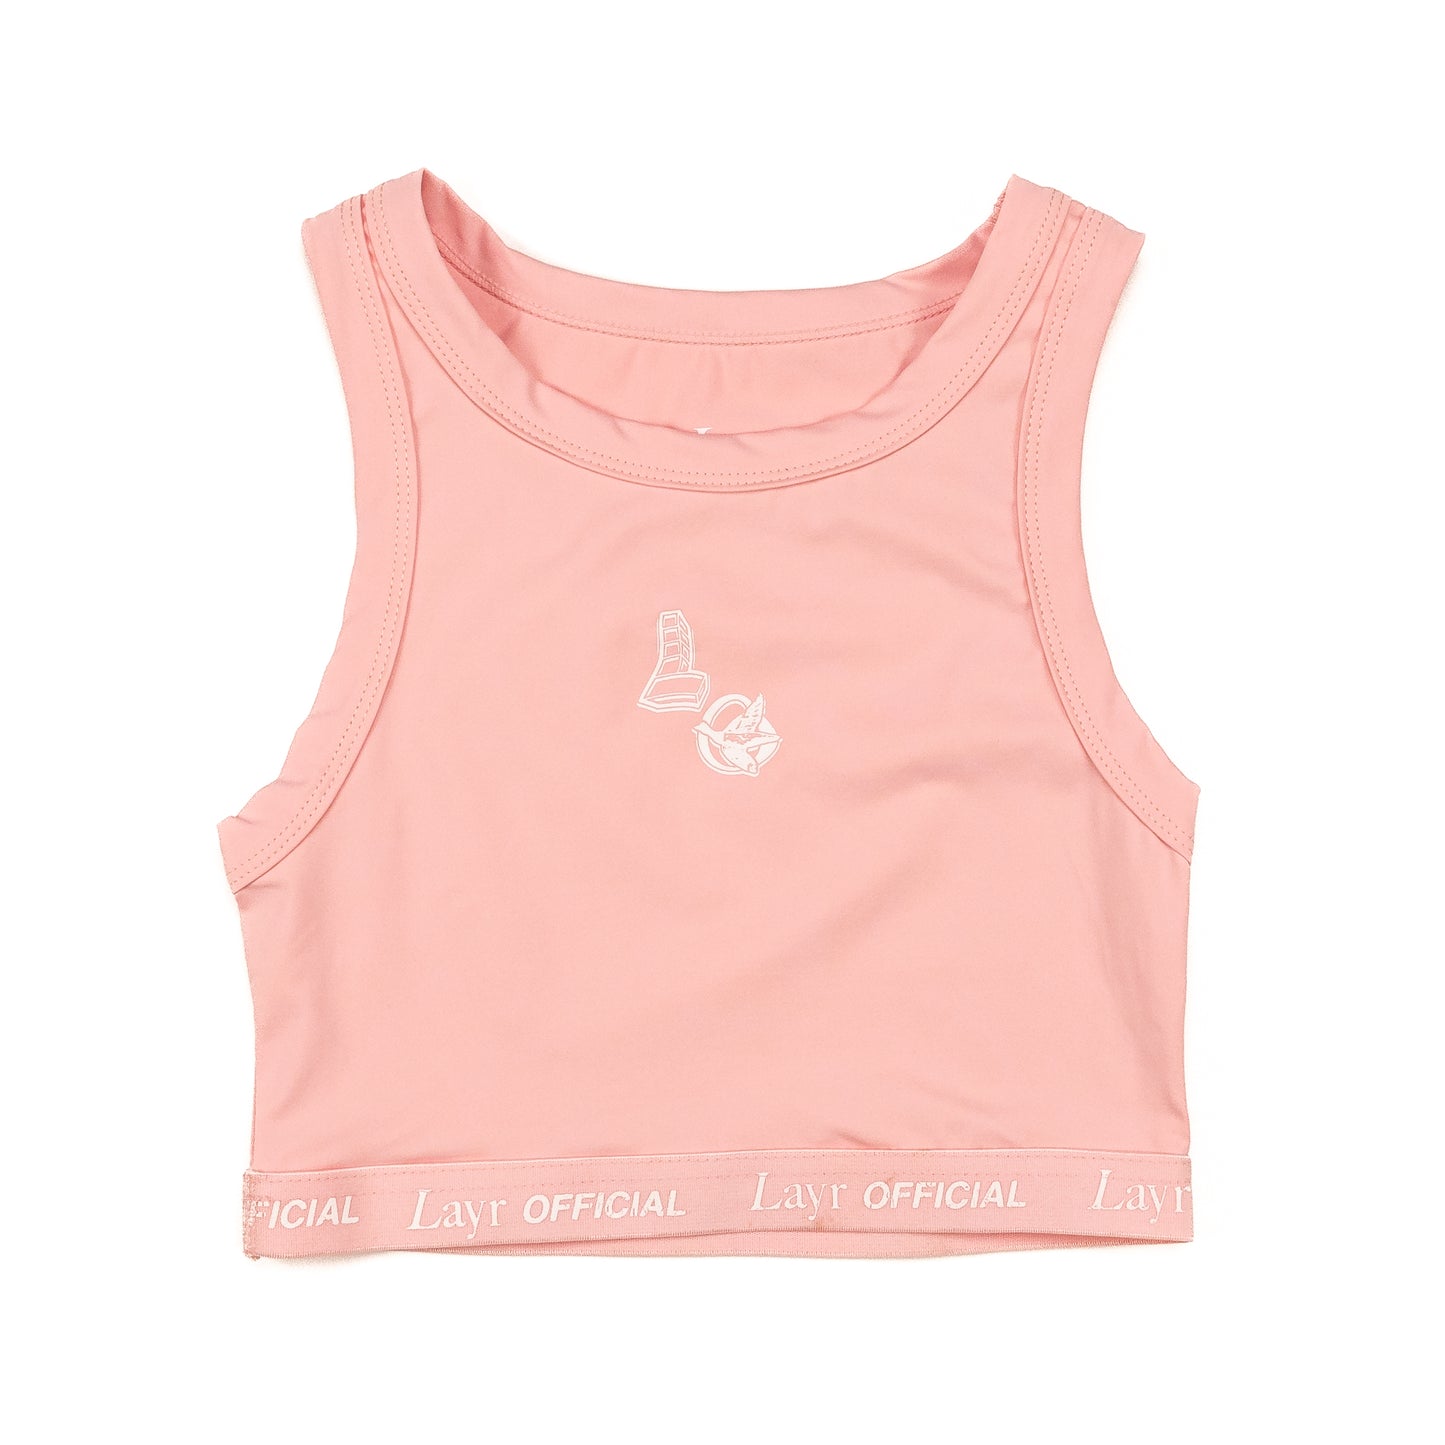 Womens New Lo Sports Bra, Pink - Layr Official